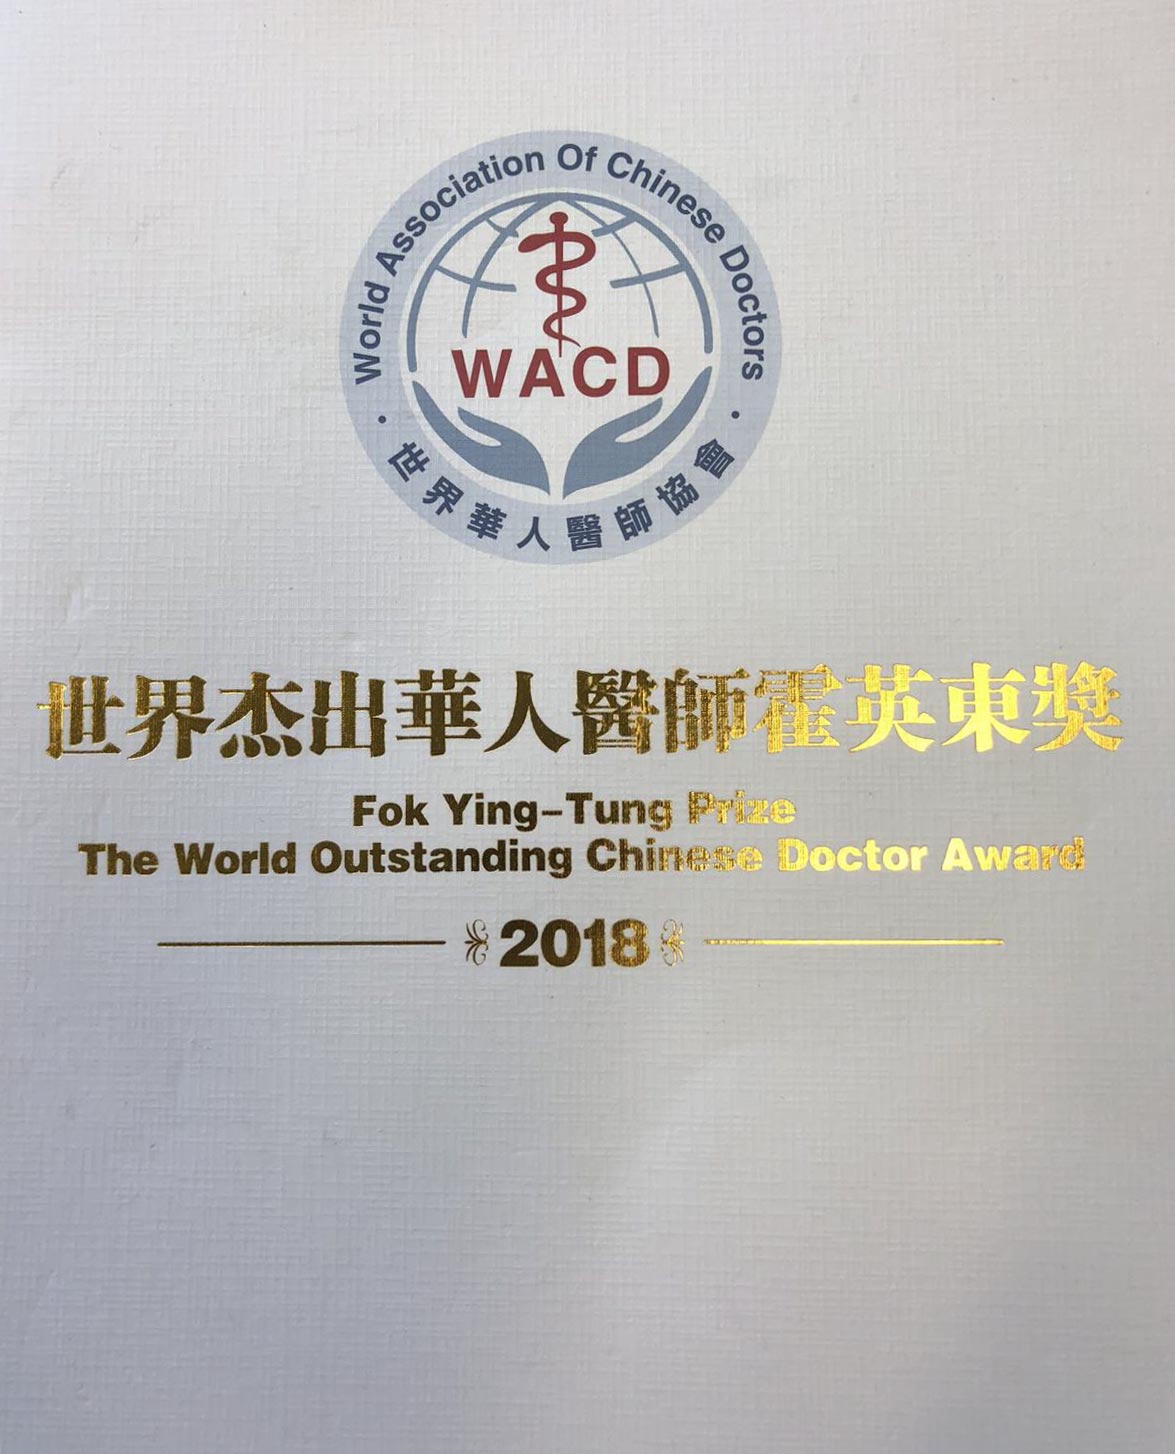 Award for the World Outstanding Chinese Doctor Award in 2018.  Most of the Award in Chinese 